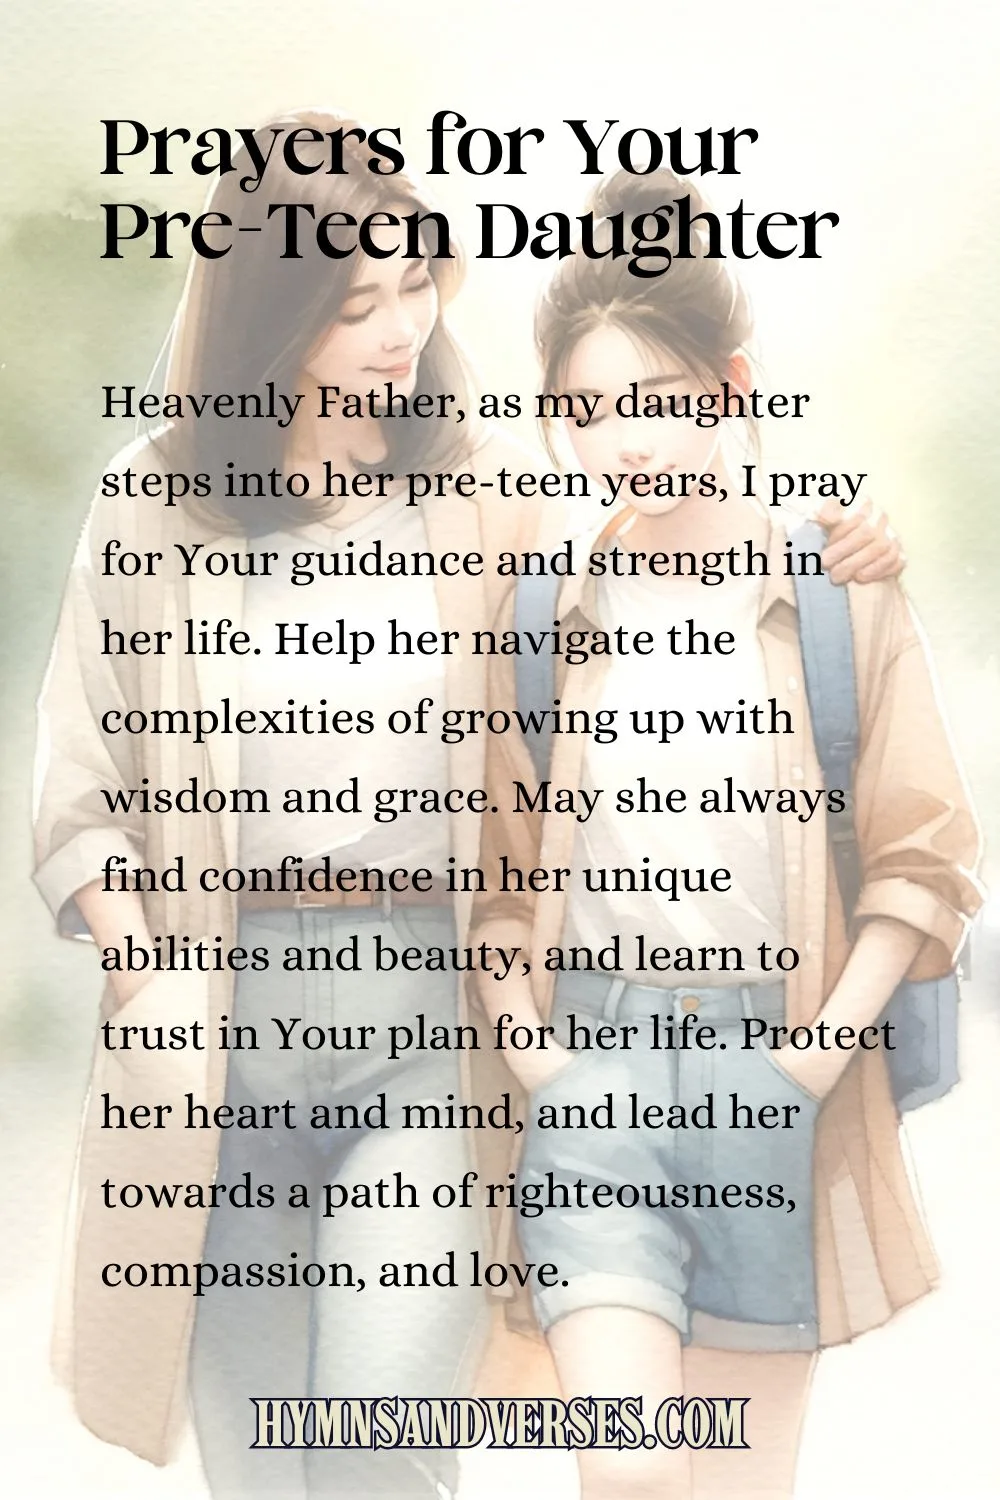 pin image for Prayers for Your Pre-Teen Daughter, reads: Heavenly Father, as my daughter steps into her pre-teen years, I pray for Your guidance and strength in her life. Help her navigate the complexities of growing up with wisdom and grace. May she always find confidence in her unique abilities and beauty, and learn to trust in Your plan for her life. Protect her heart and mind, and lead her towards a path of righteousness, compassion, and love.